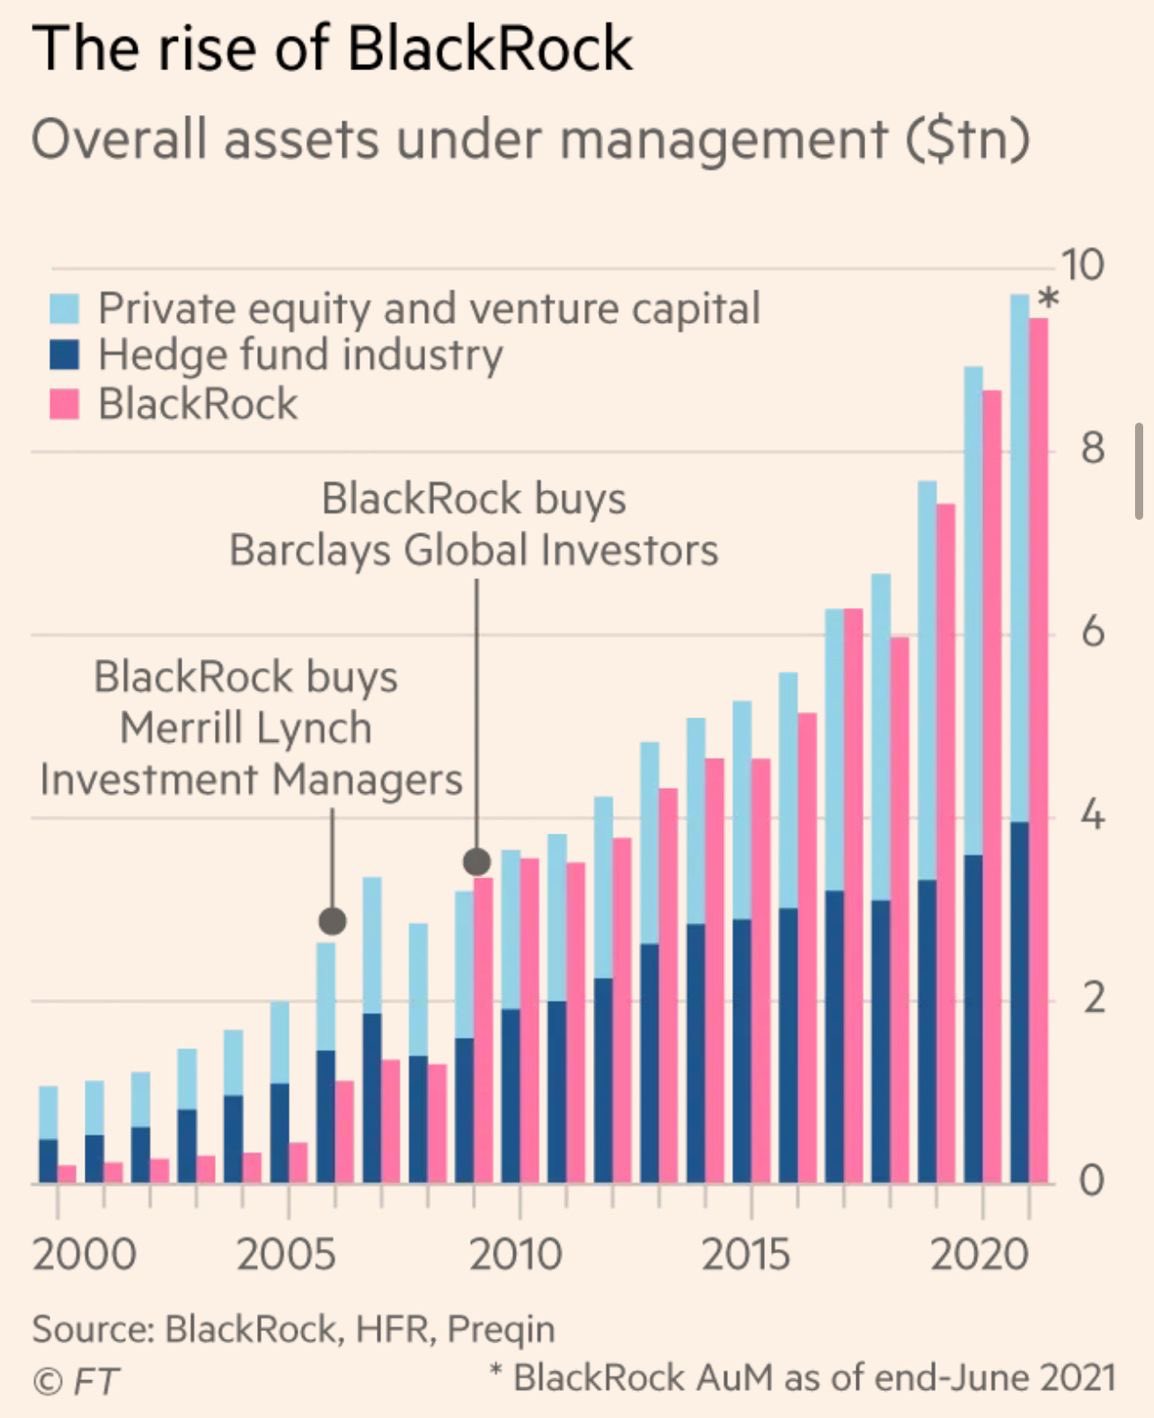 Alvin Foo On Twitter The Scale Of Blackrock Is Massive The World S Largest Asset Manager Is Approaching 10tn Aum Almost Larger Than The Hedge Fund Vc And Pe Industry Combined Https T Co Zbmjd5u1er